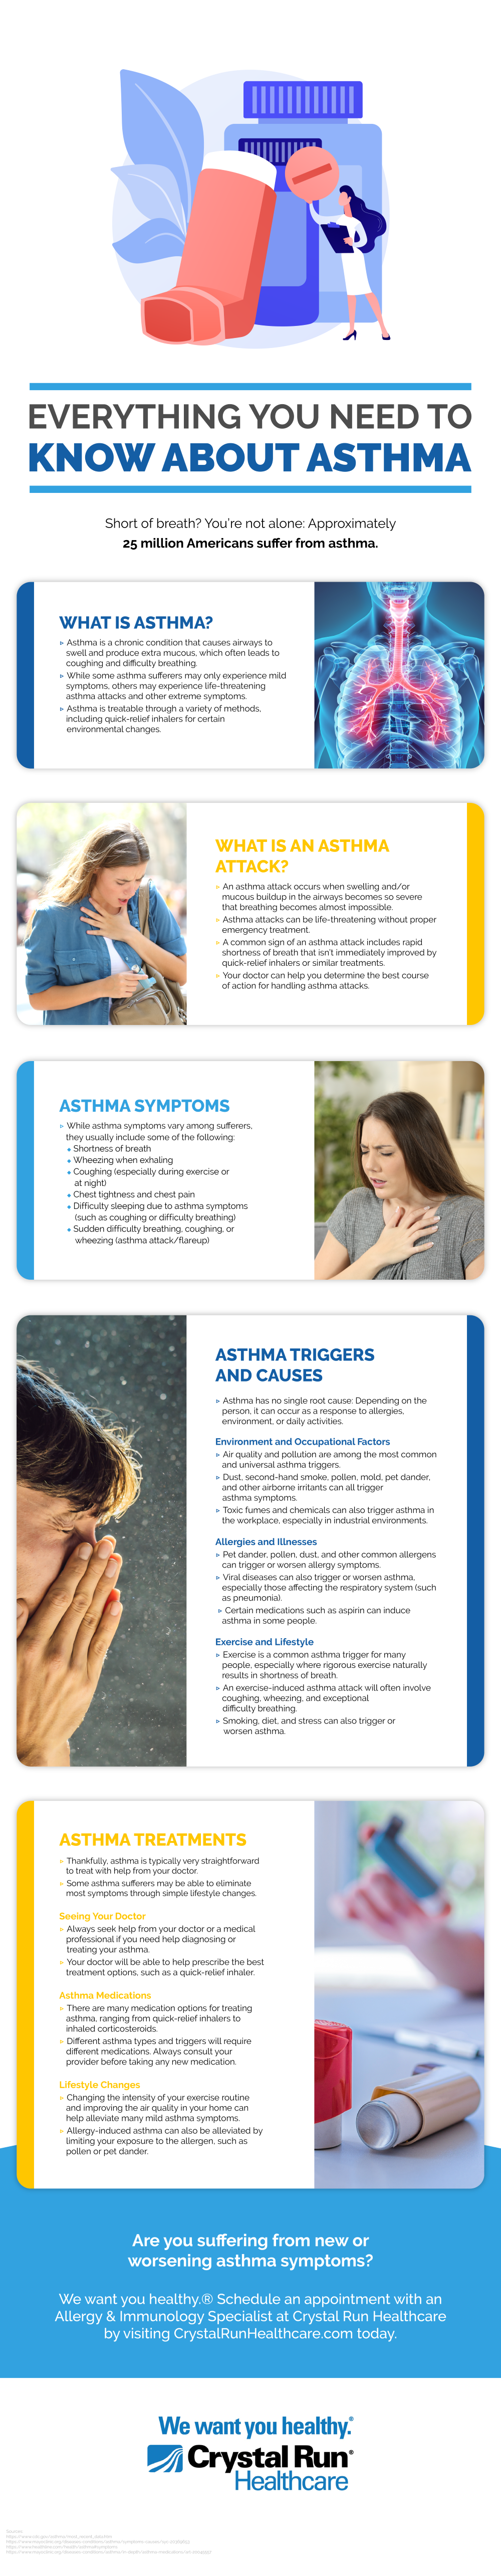 Everything You Need to Know About Asthma Infographic